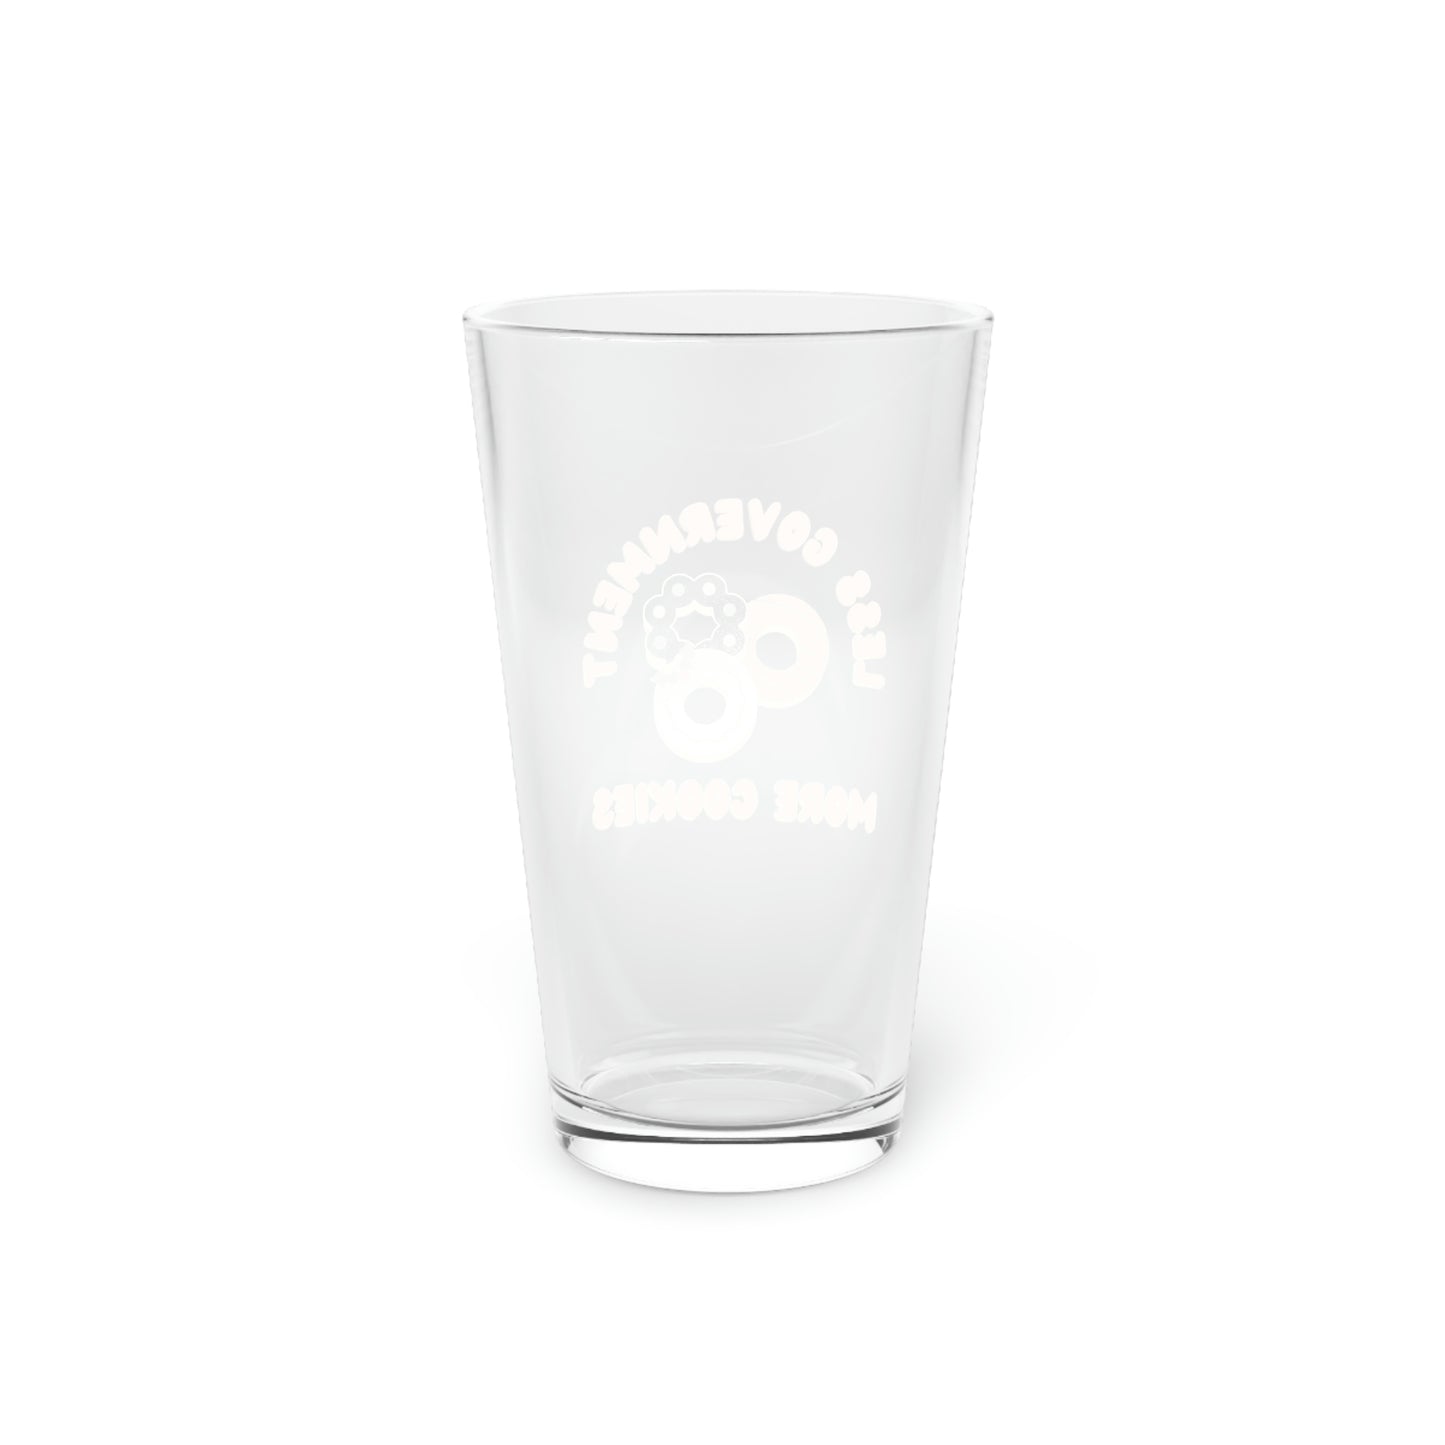 "Less Government" Pint Glass for Santa